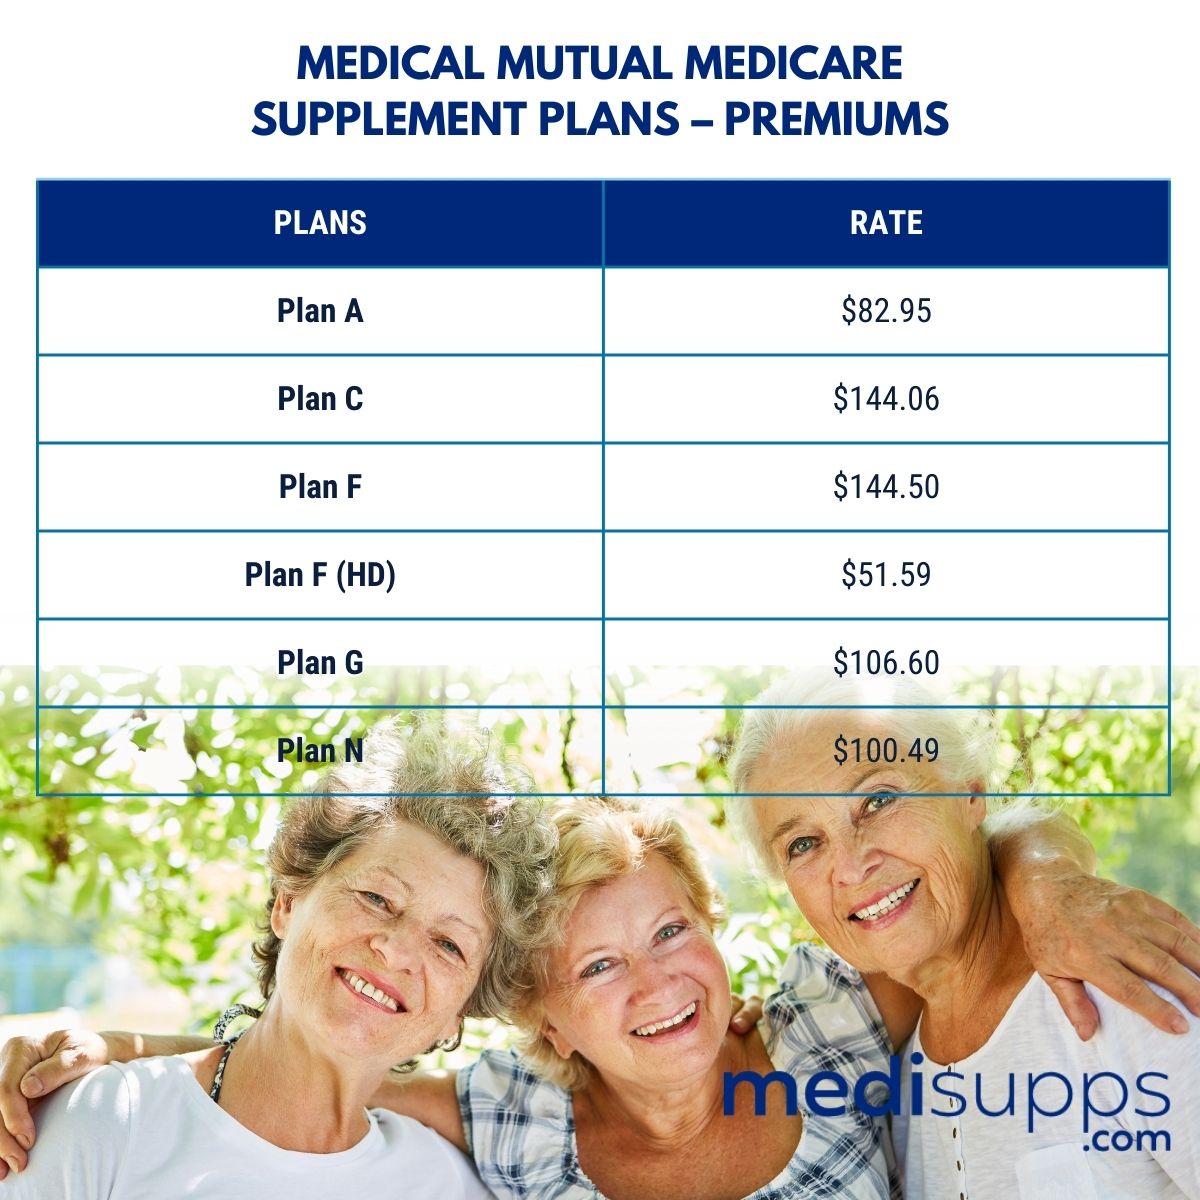 Medical Mutual Medicare Supplement Plans – Premiums